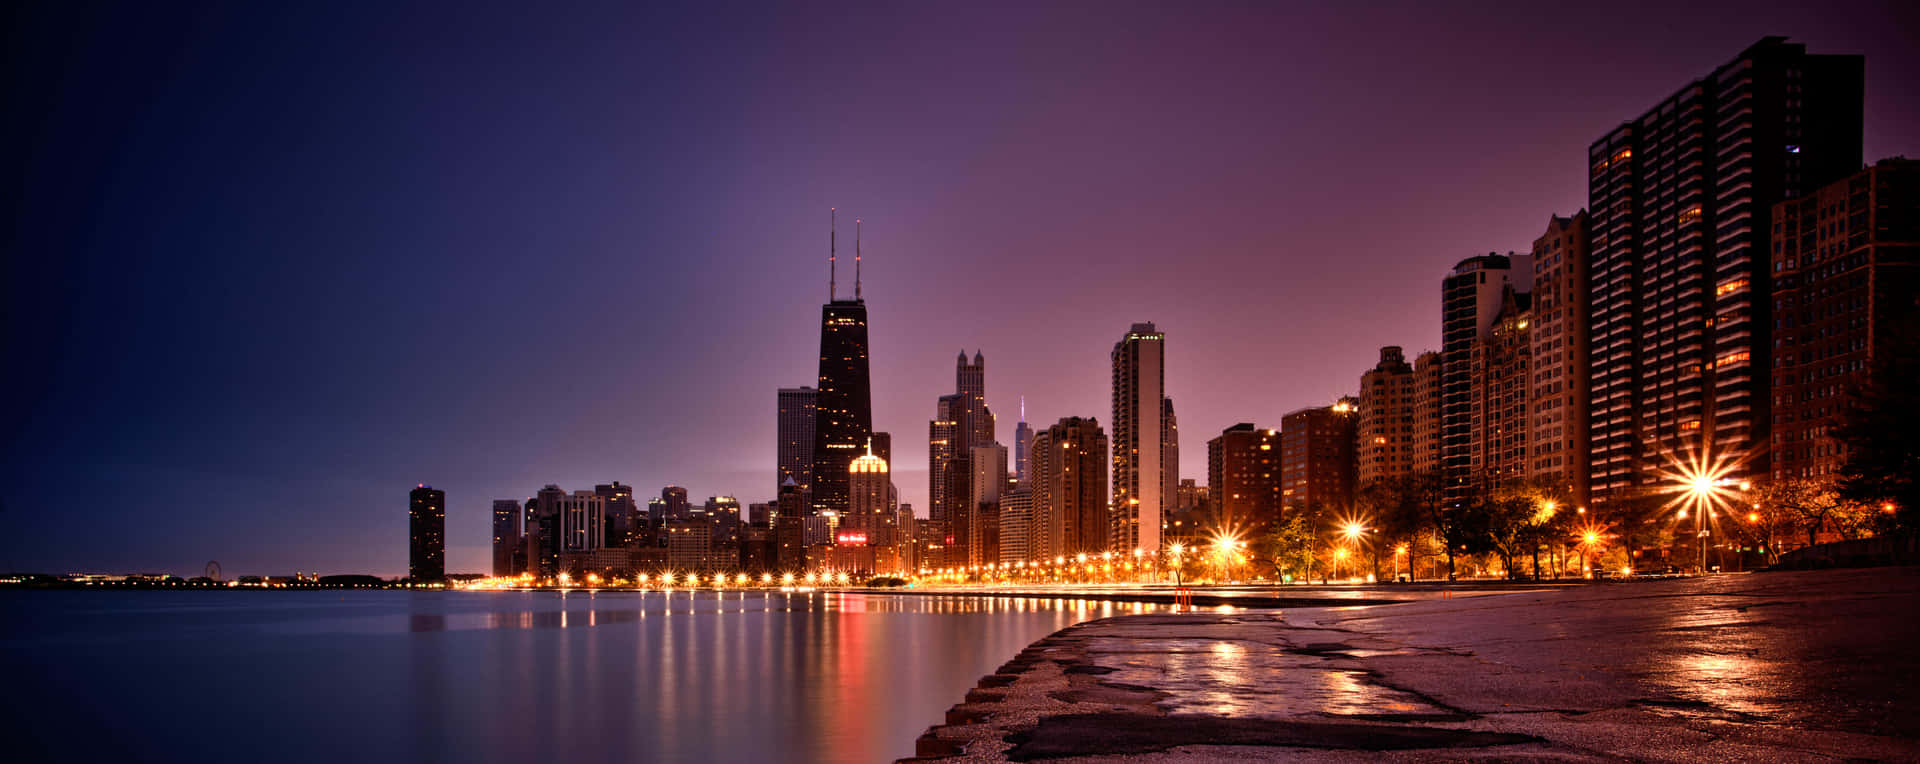 Chicago City Night By The Waterfront Wallpaper